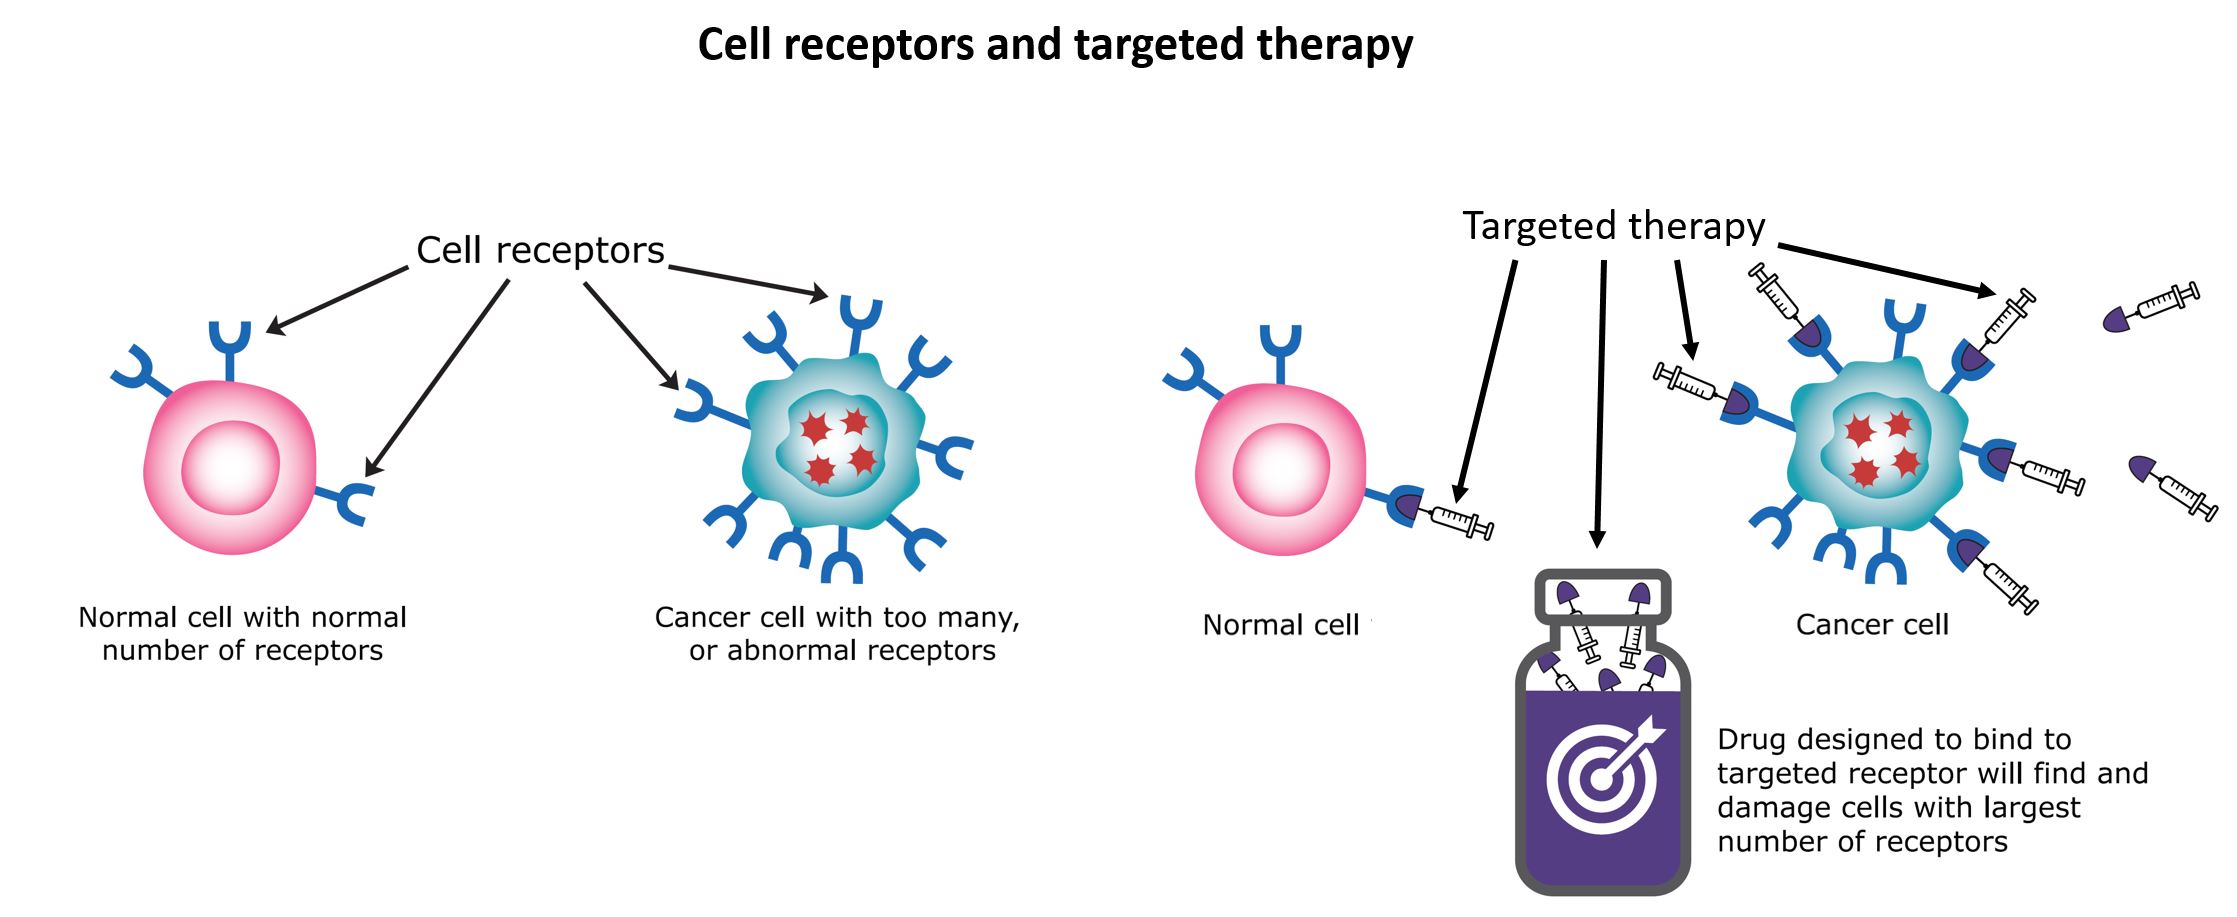 Image of how <button
                x-data
                class='glossary-tip tt-targeted-therapy'
                x-tooltip='<p>Targeted therapies are medications that are designed to kill only cancer cells while sparing normal cells. They tend to cause fewer side effects than chemotherapy drugs, which are more likely to kill healthy cells along with cancer cells.</p>'
            >targeted therapy</button> works